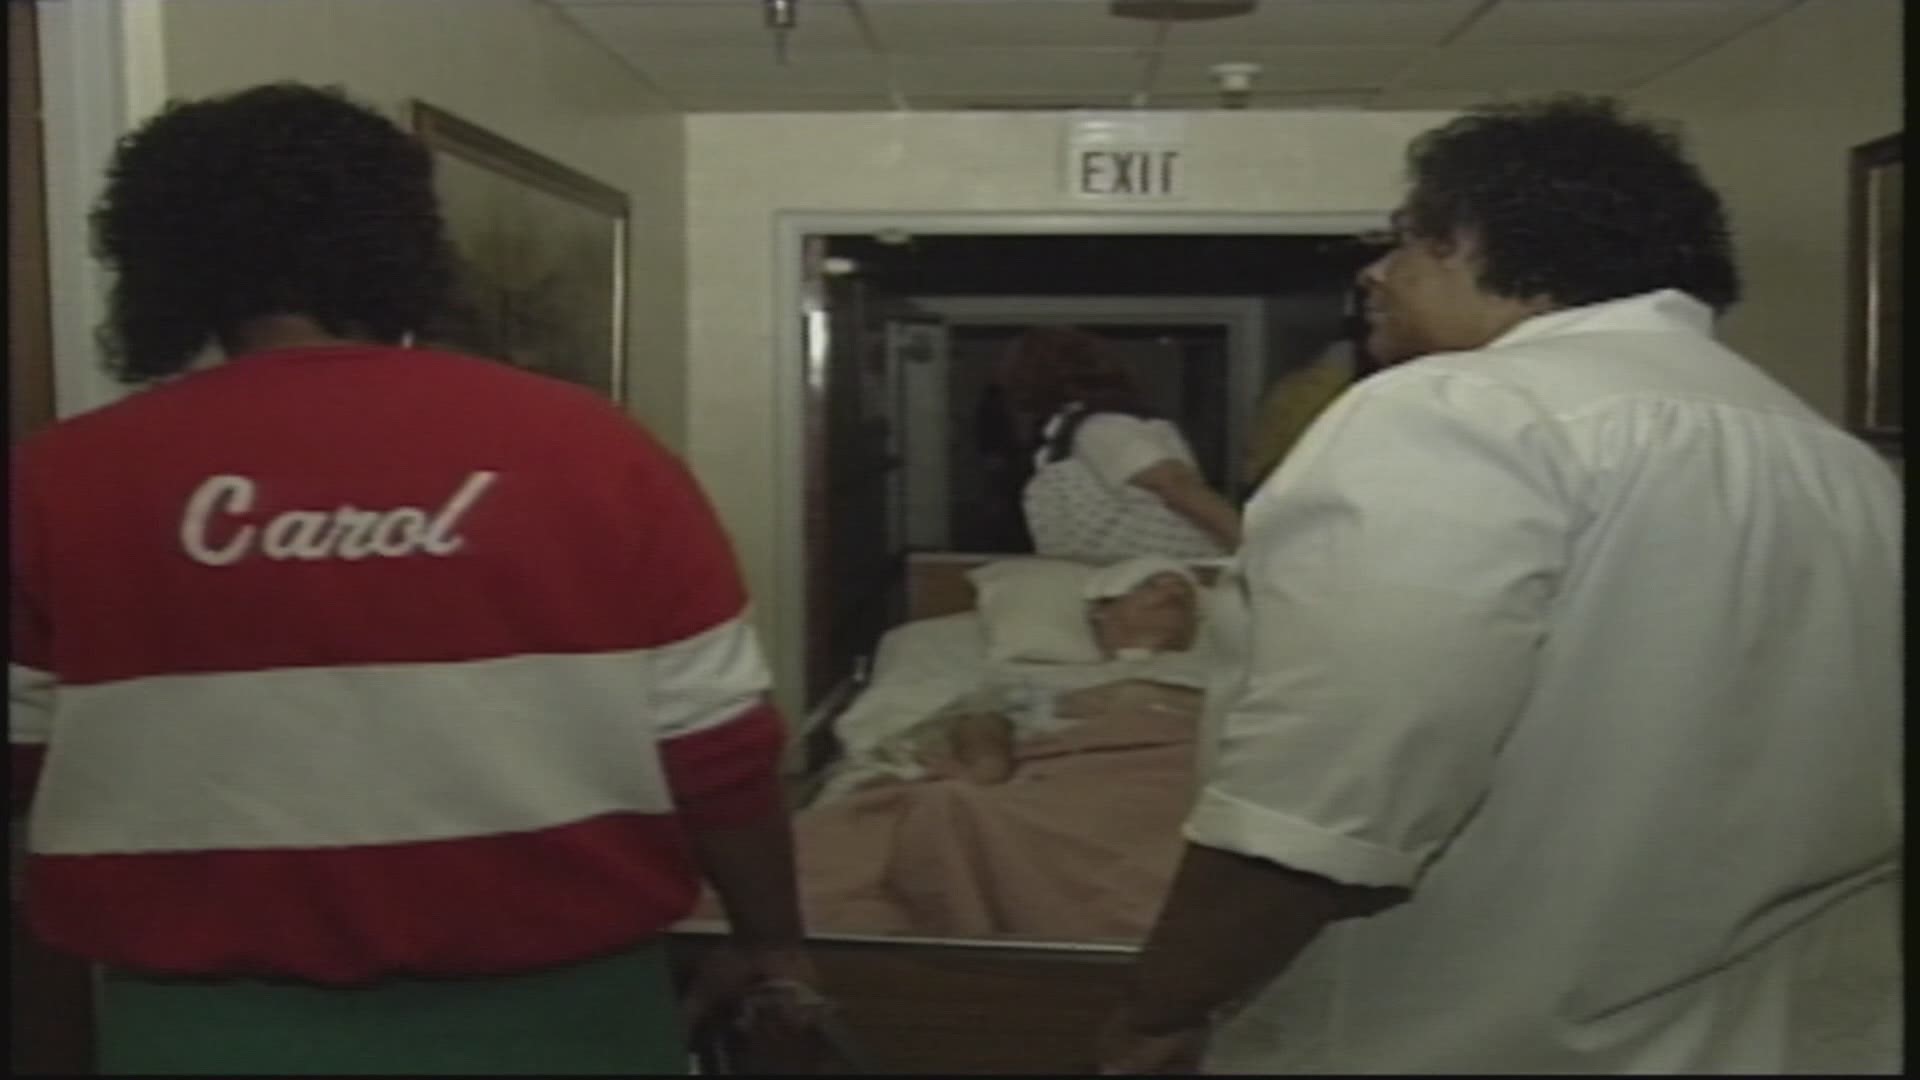 The "Storm of the Century" blew through the country in March 1993. Here's how Central Georgia nursing homes dealt with the loss of power after the storm.